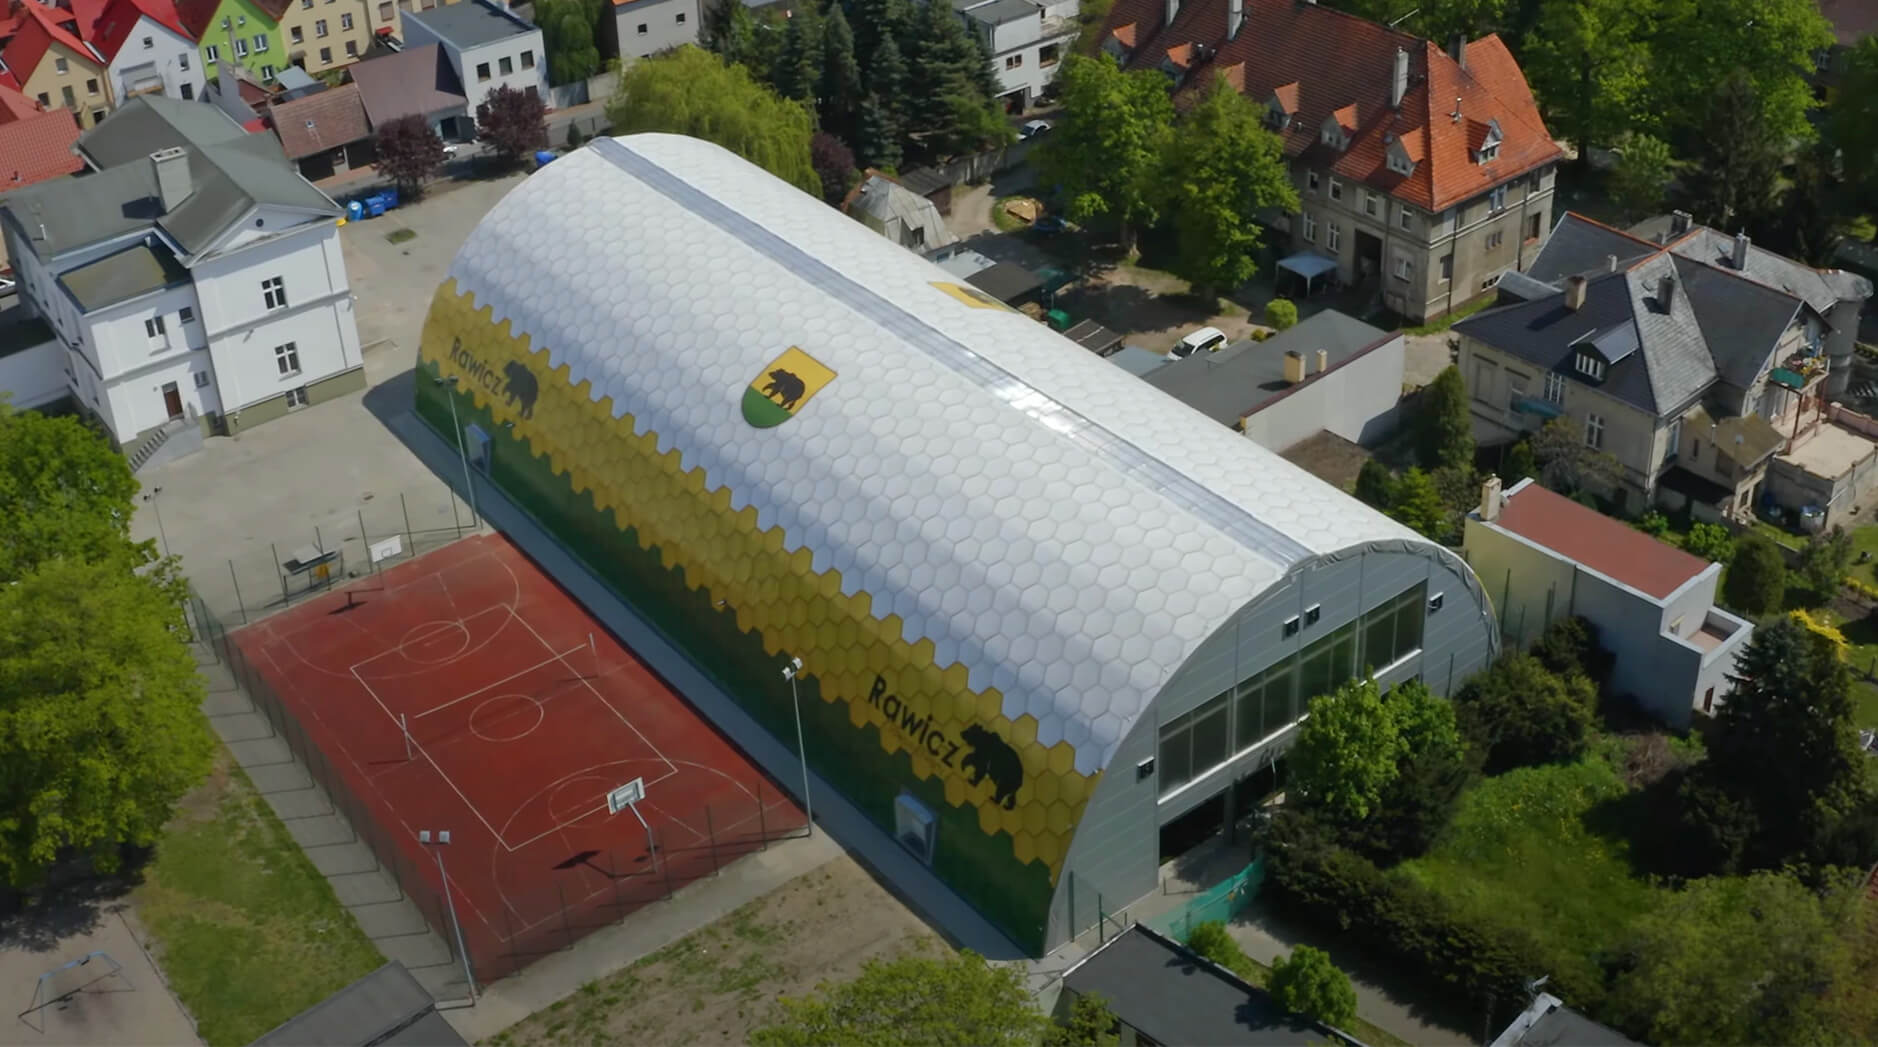 Sport building as domes for playing fields like: football / soccer, tenis, basketball or hockey